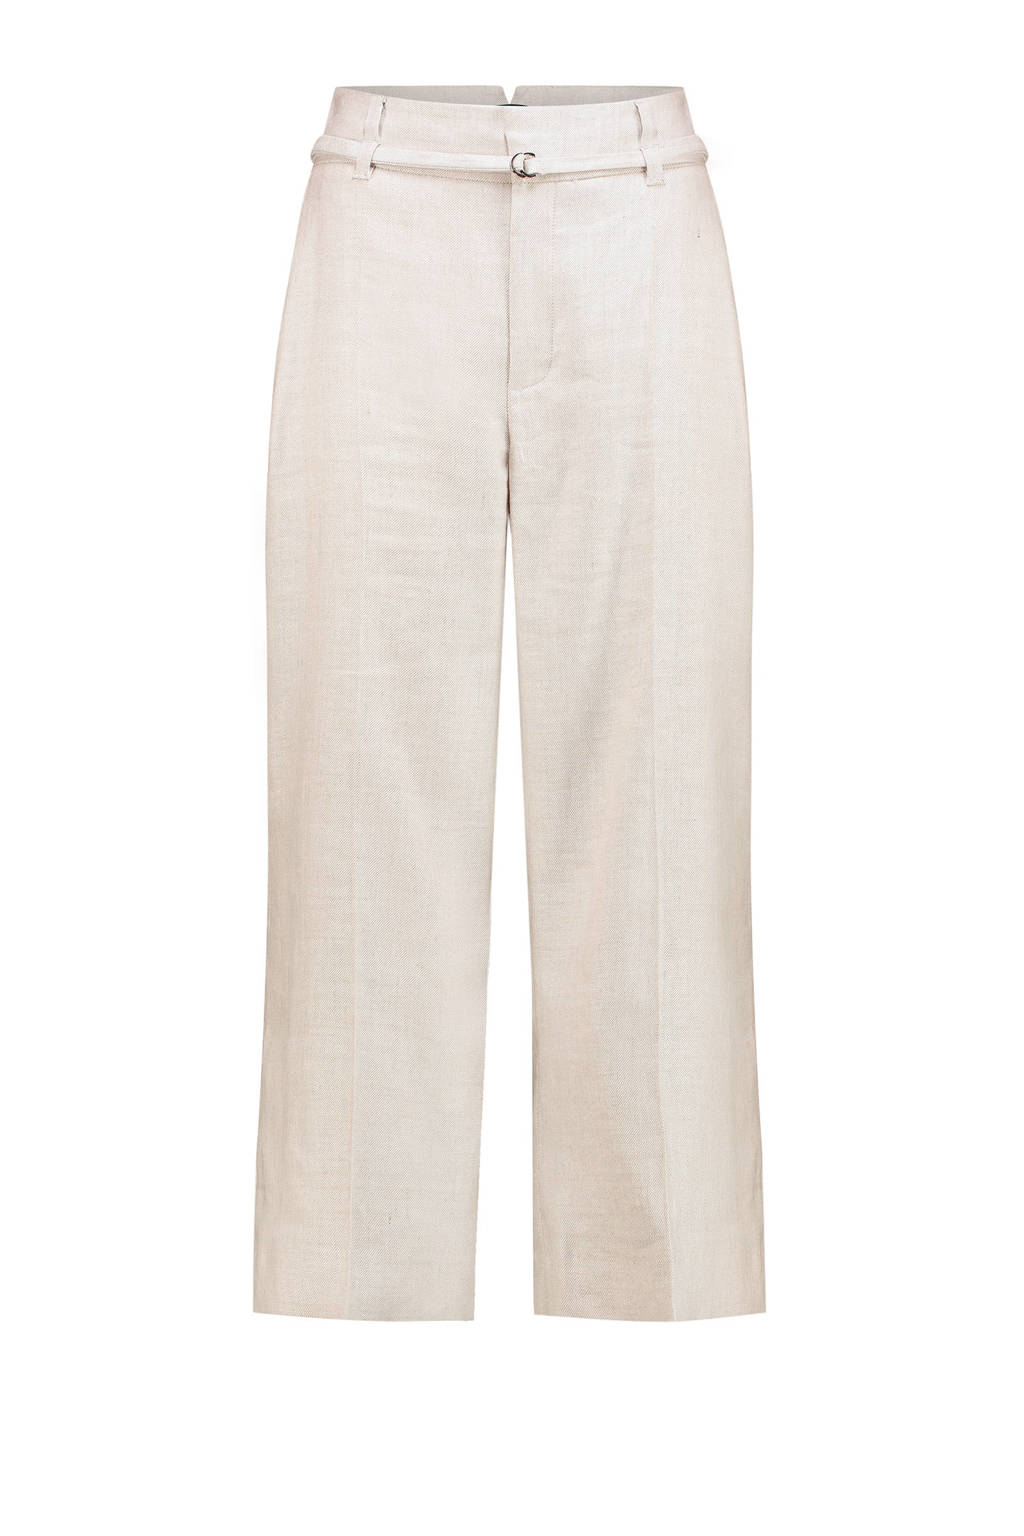 Claudia Sträter cropped high waist loose fit pantalon beige